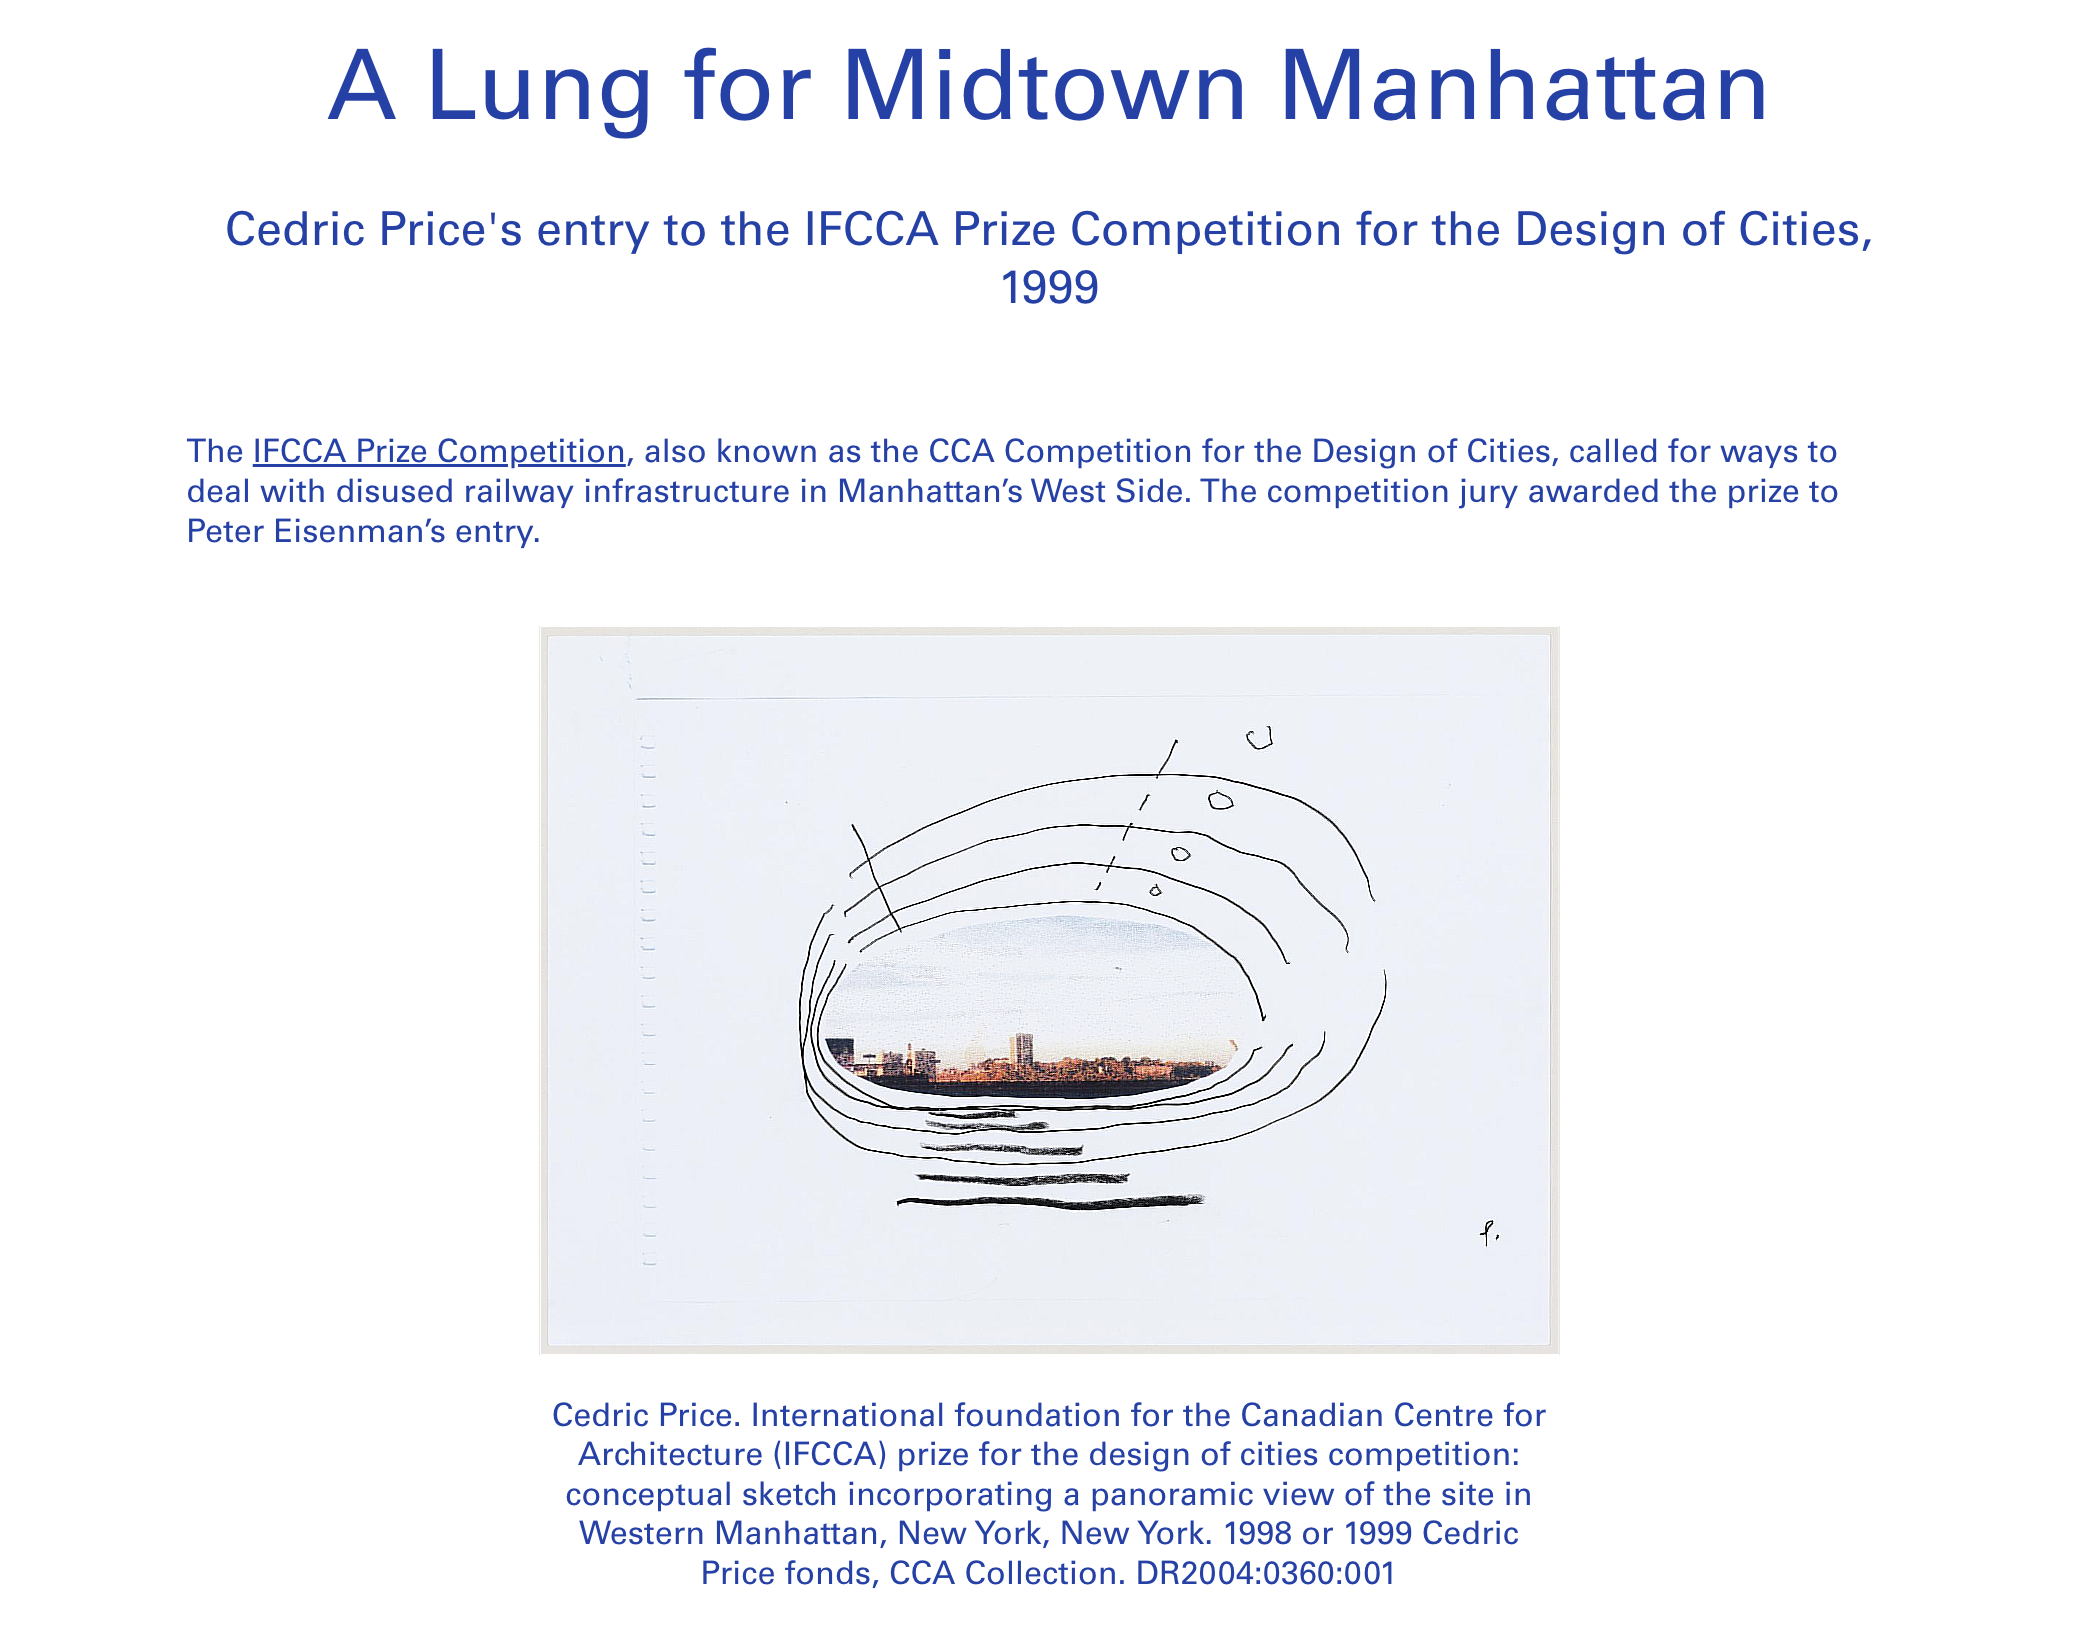 Item 24461 - A Lung for Midtown Manhattan, Cedric Price's entry to the IFCCA Prize Competition for the Design of Cities, 1999.png